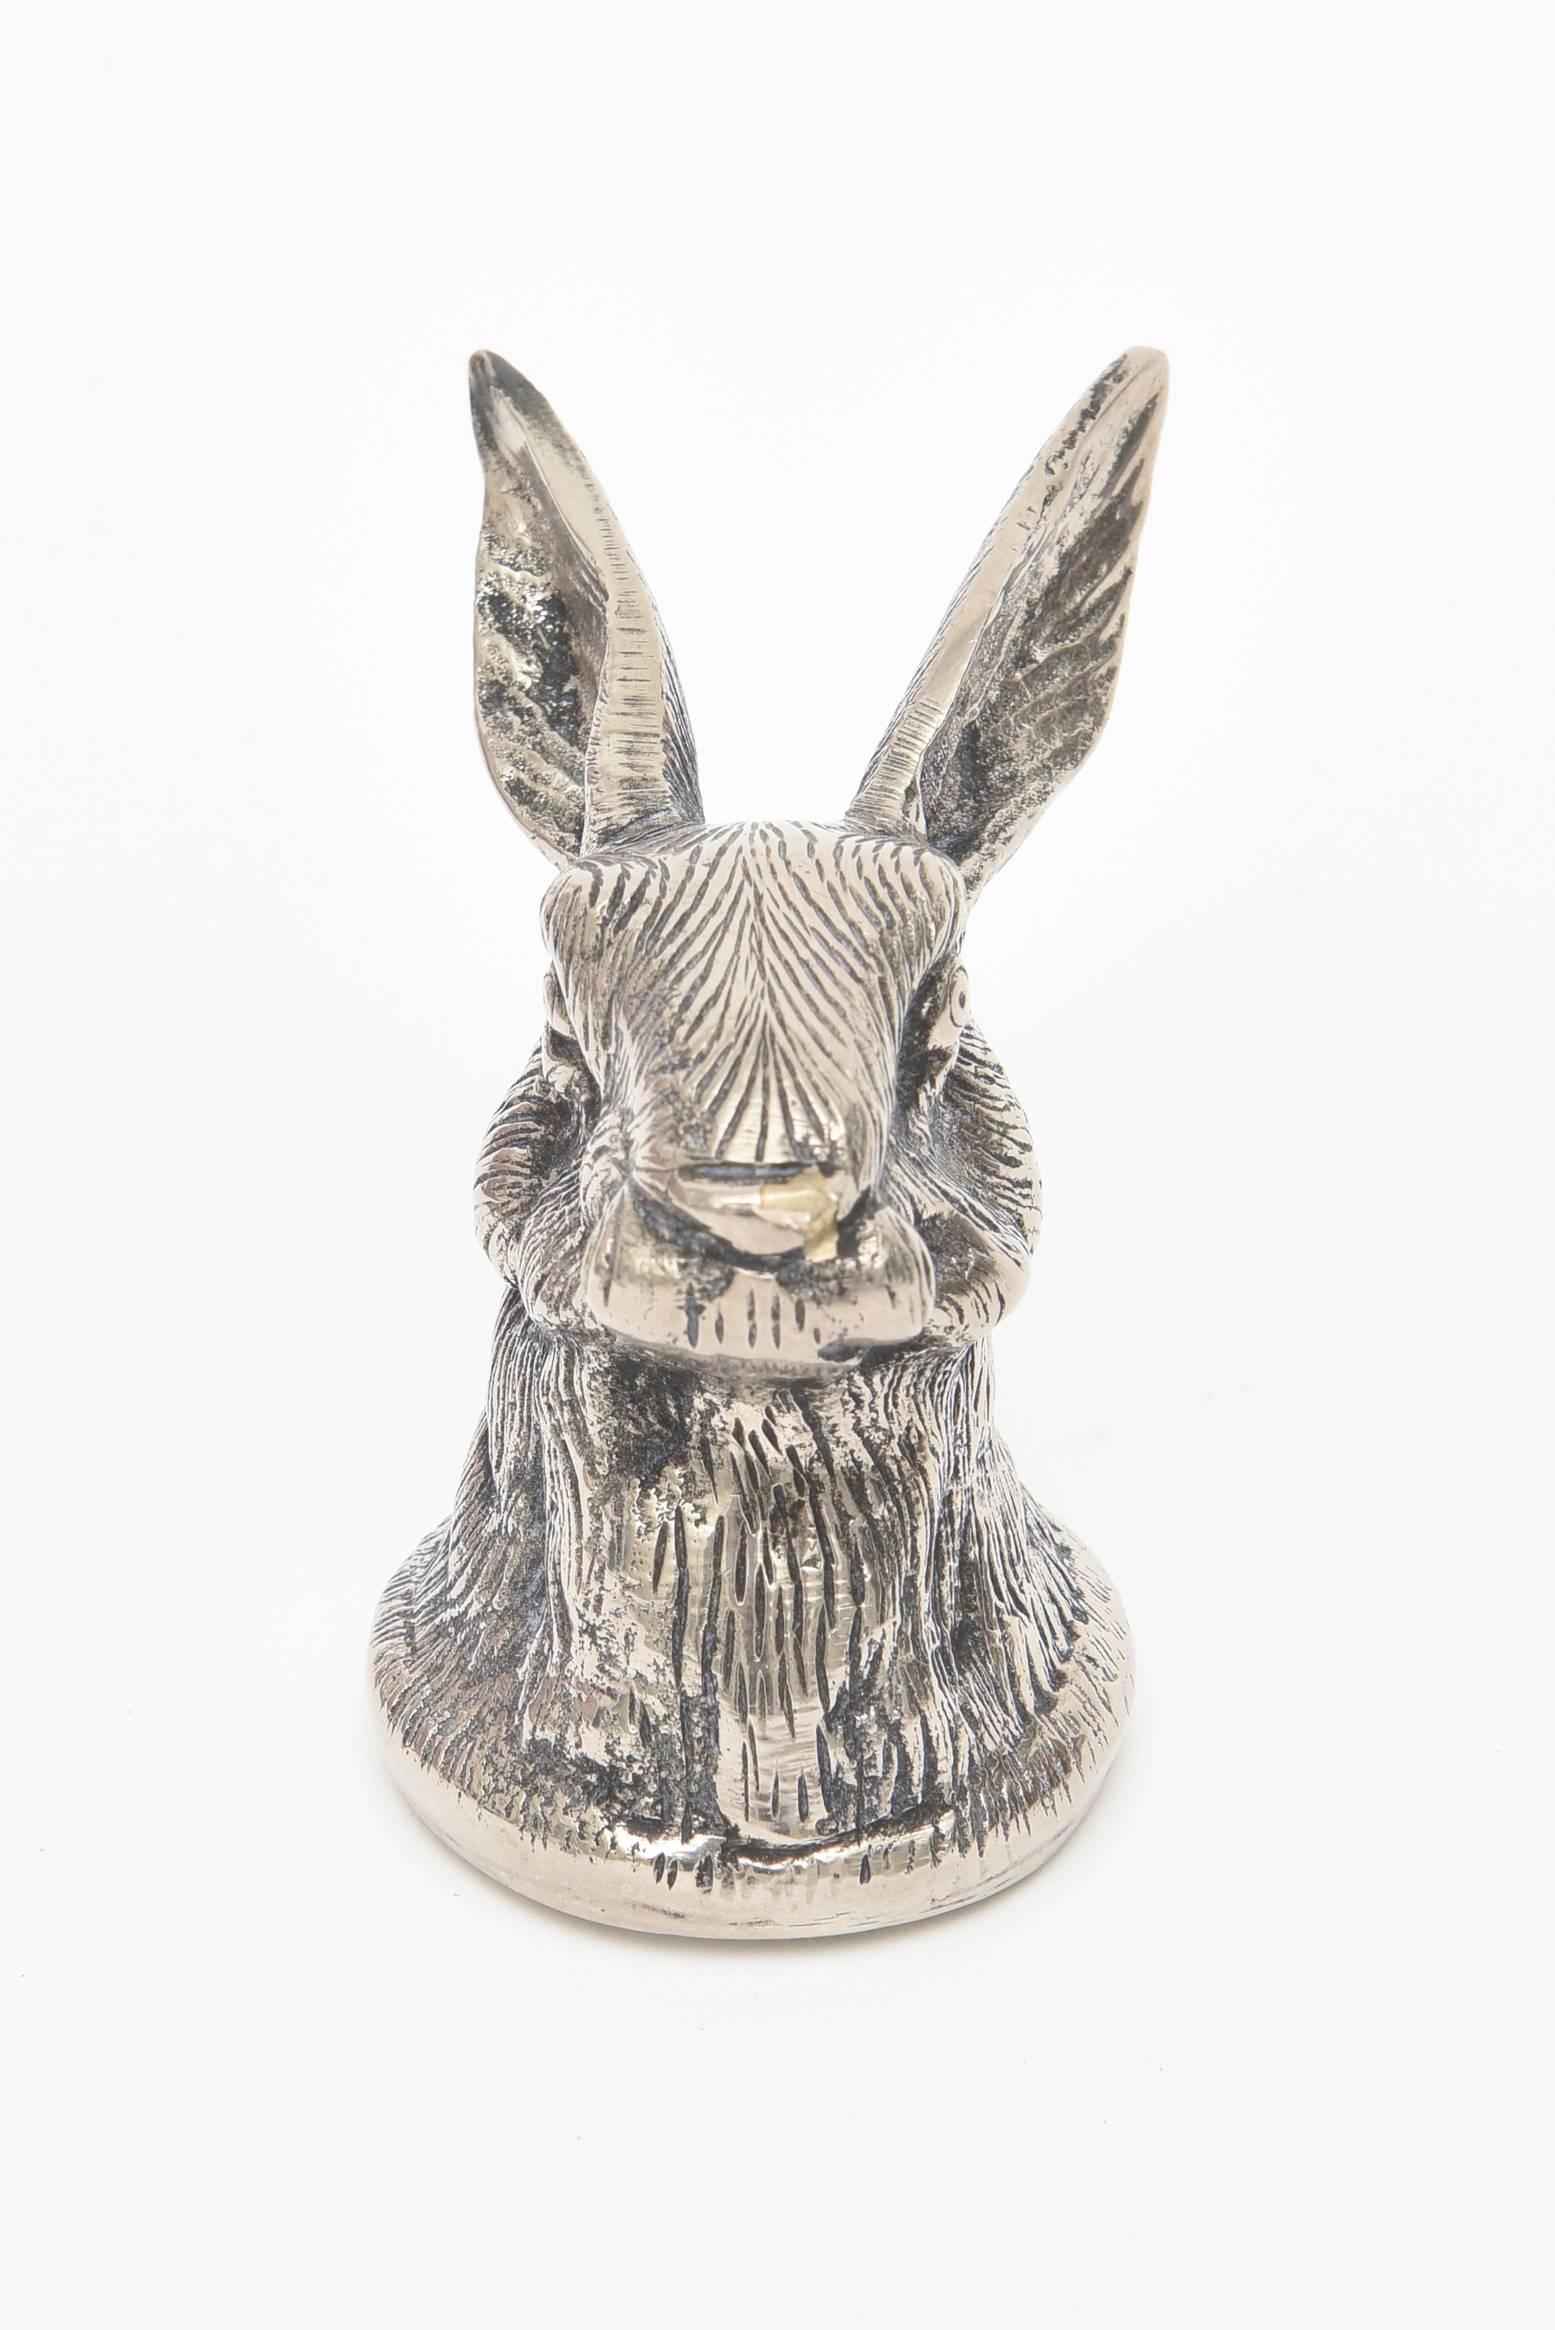 This Italian signed Gucci silver plate bottle opener is whimsical and not your ordinary barware piece.
A rabbit is searching for the right bottle to open. Stands vertical. It is marked "Gucci Made in Italy" It is textured metal.
Fun!
 